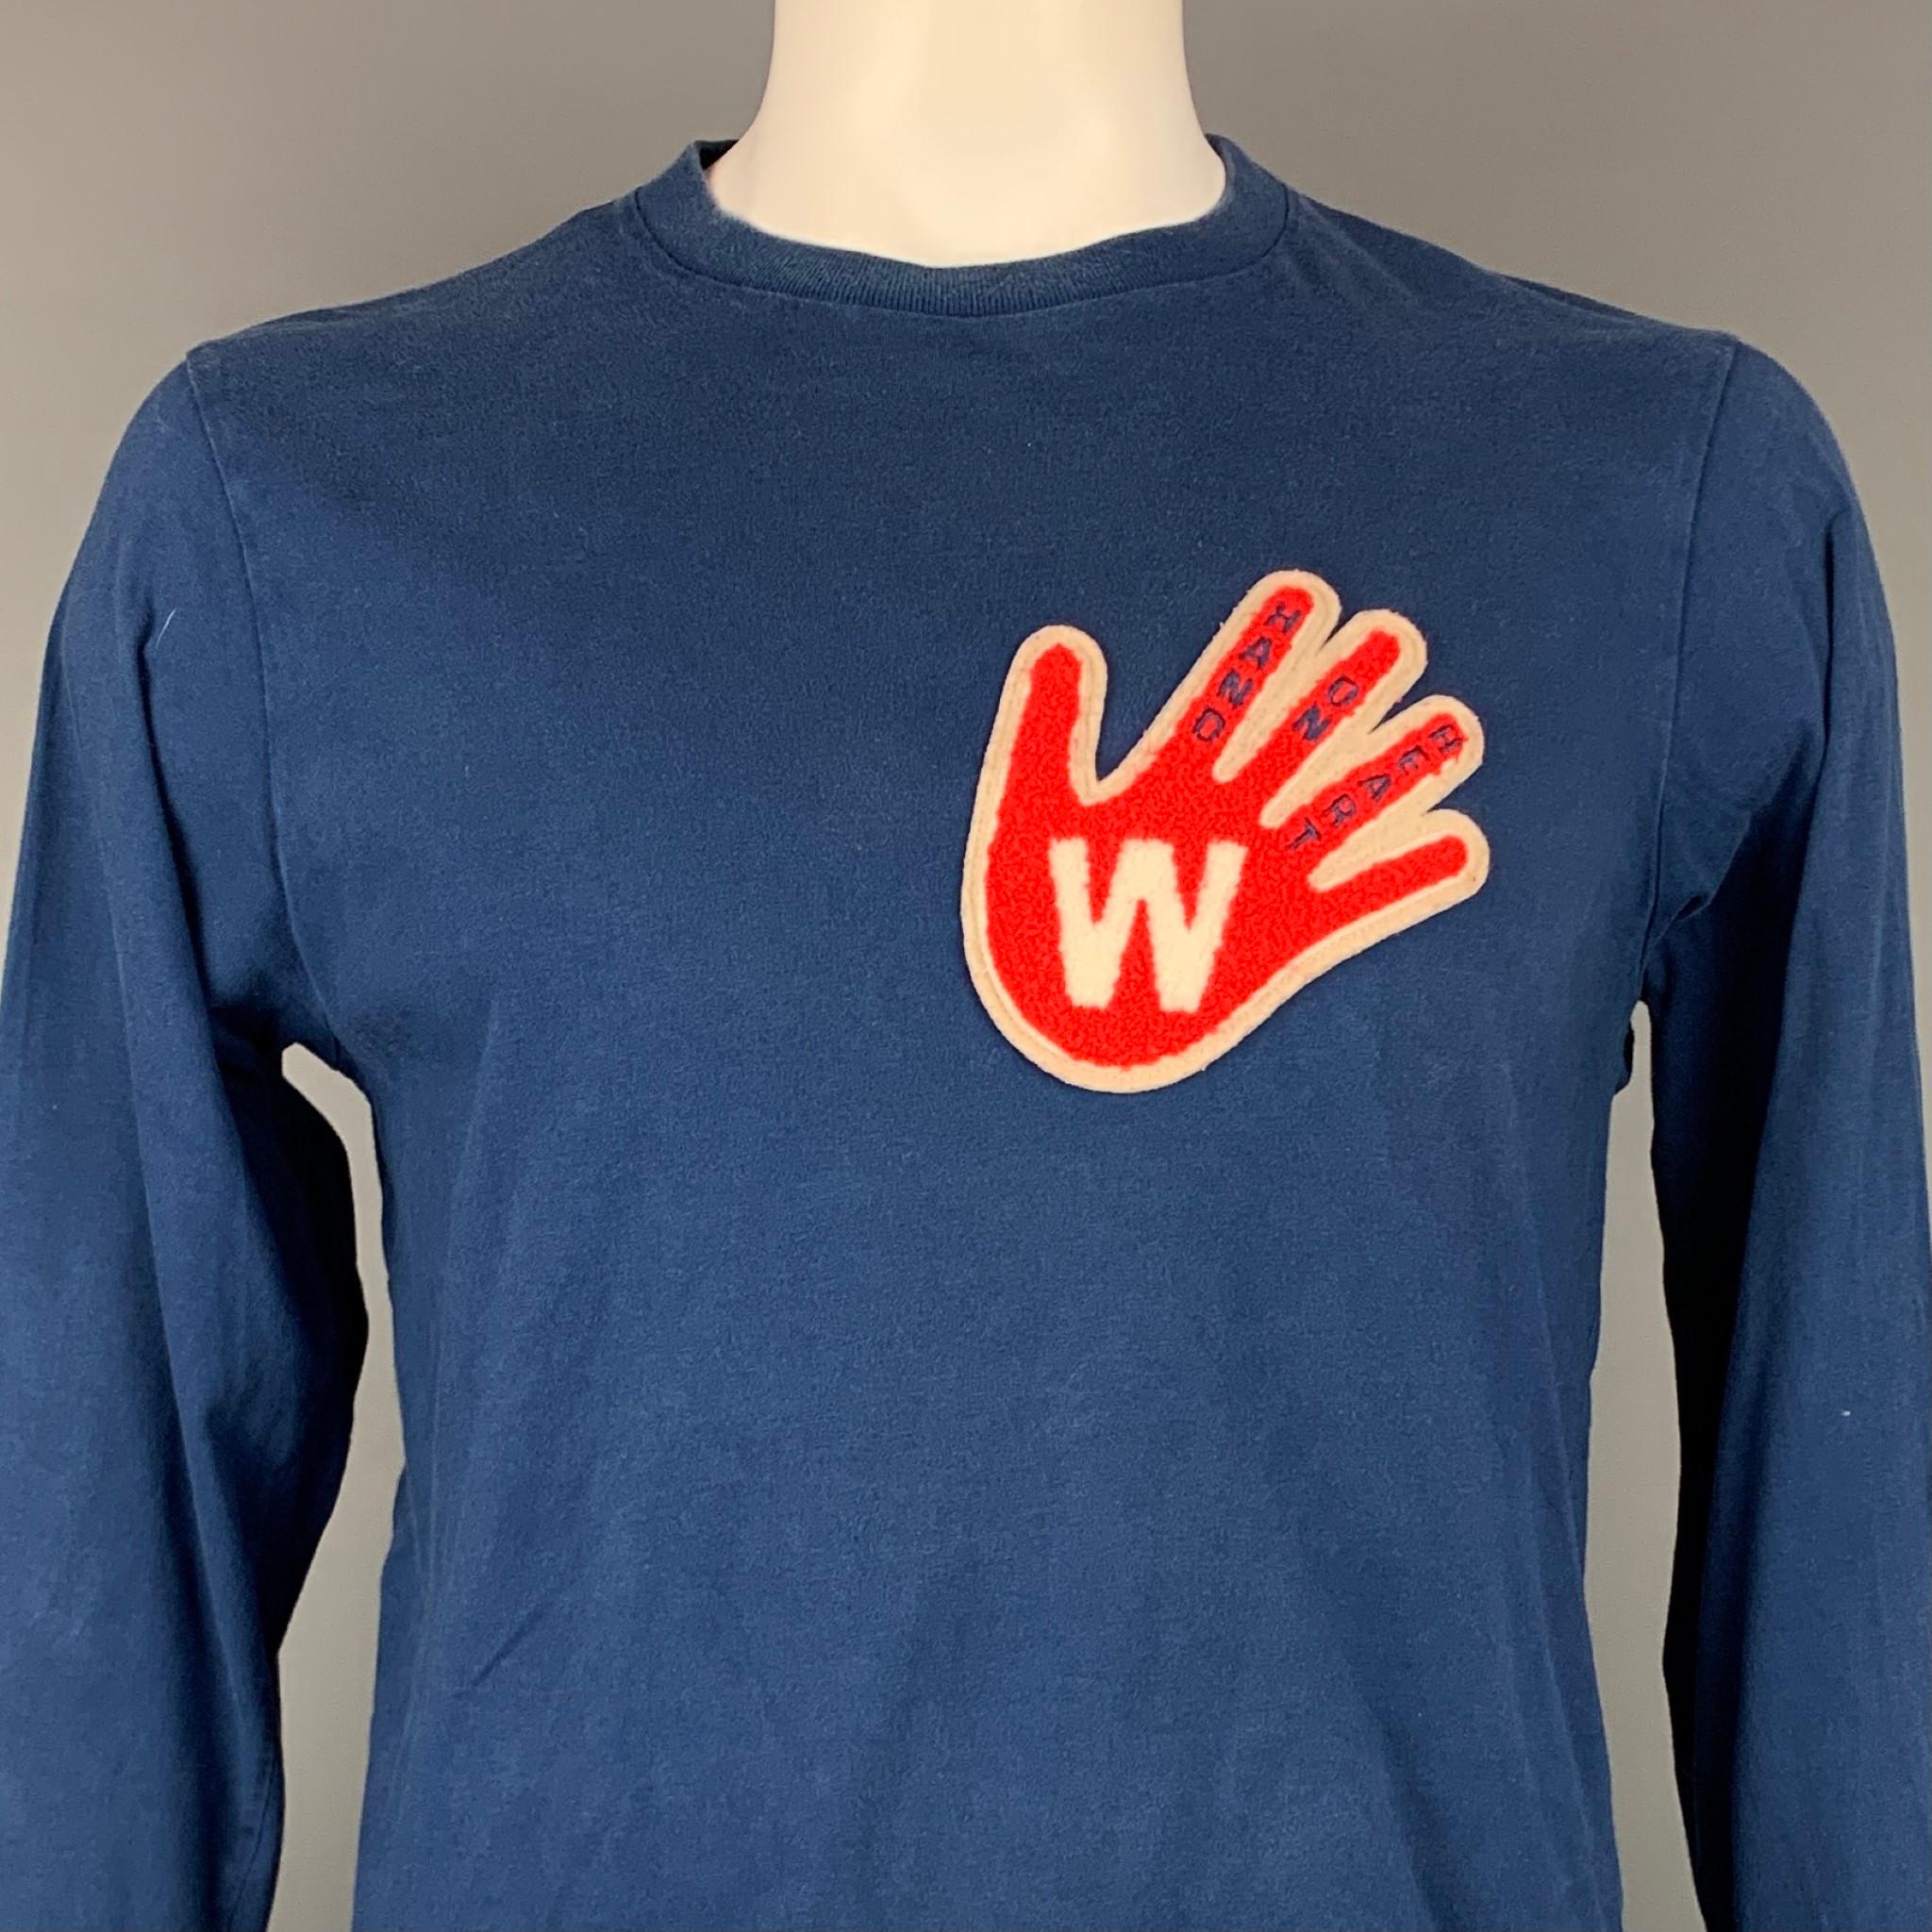 WALTER VAN BEIRENDONCK 2011-12 pullover comes in a blue & red cotton with a 